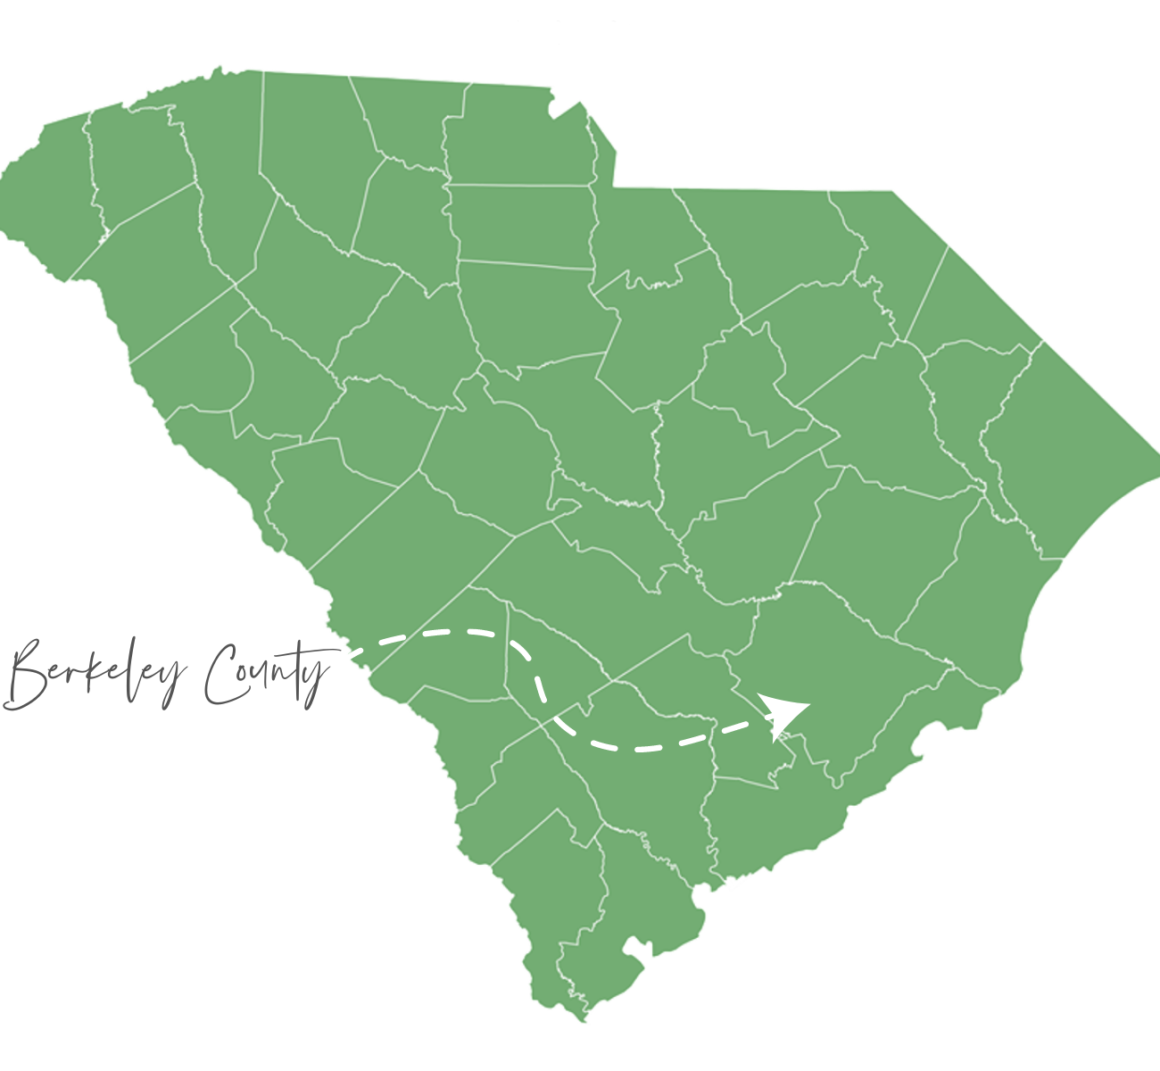 a map of South Carolina and the location of Berkeley County.